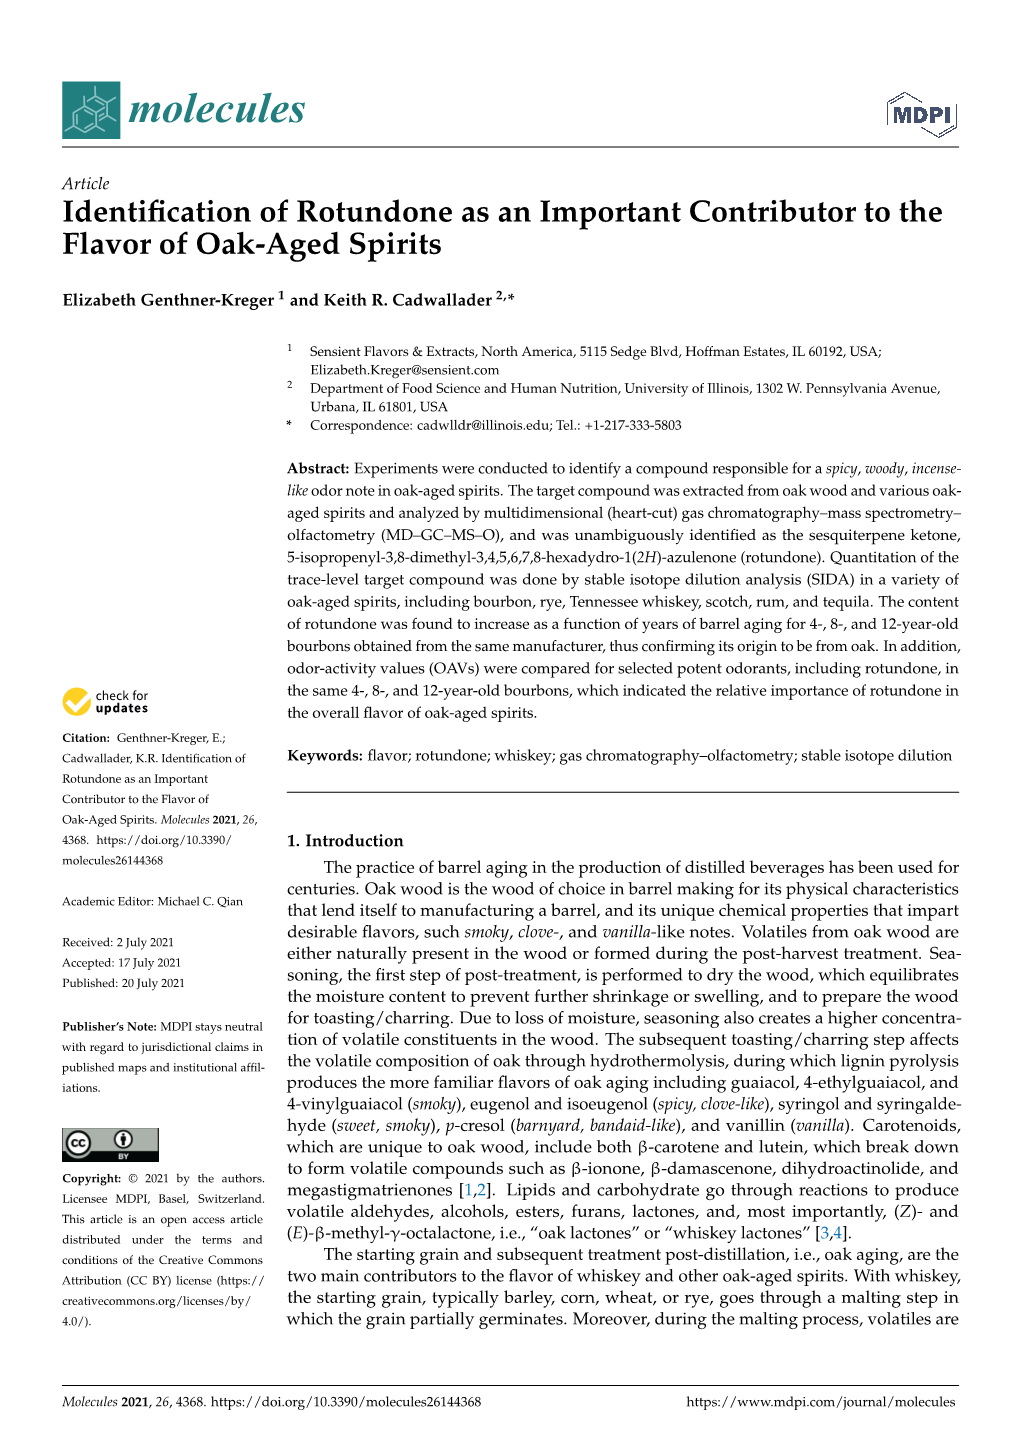 Identification of Rotundone As an Important Contributor to the Flavor of Oak-Aged Spirits